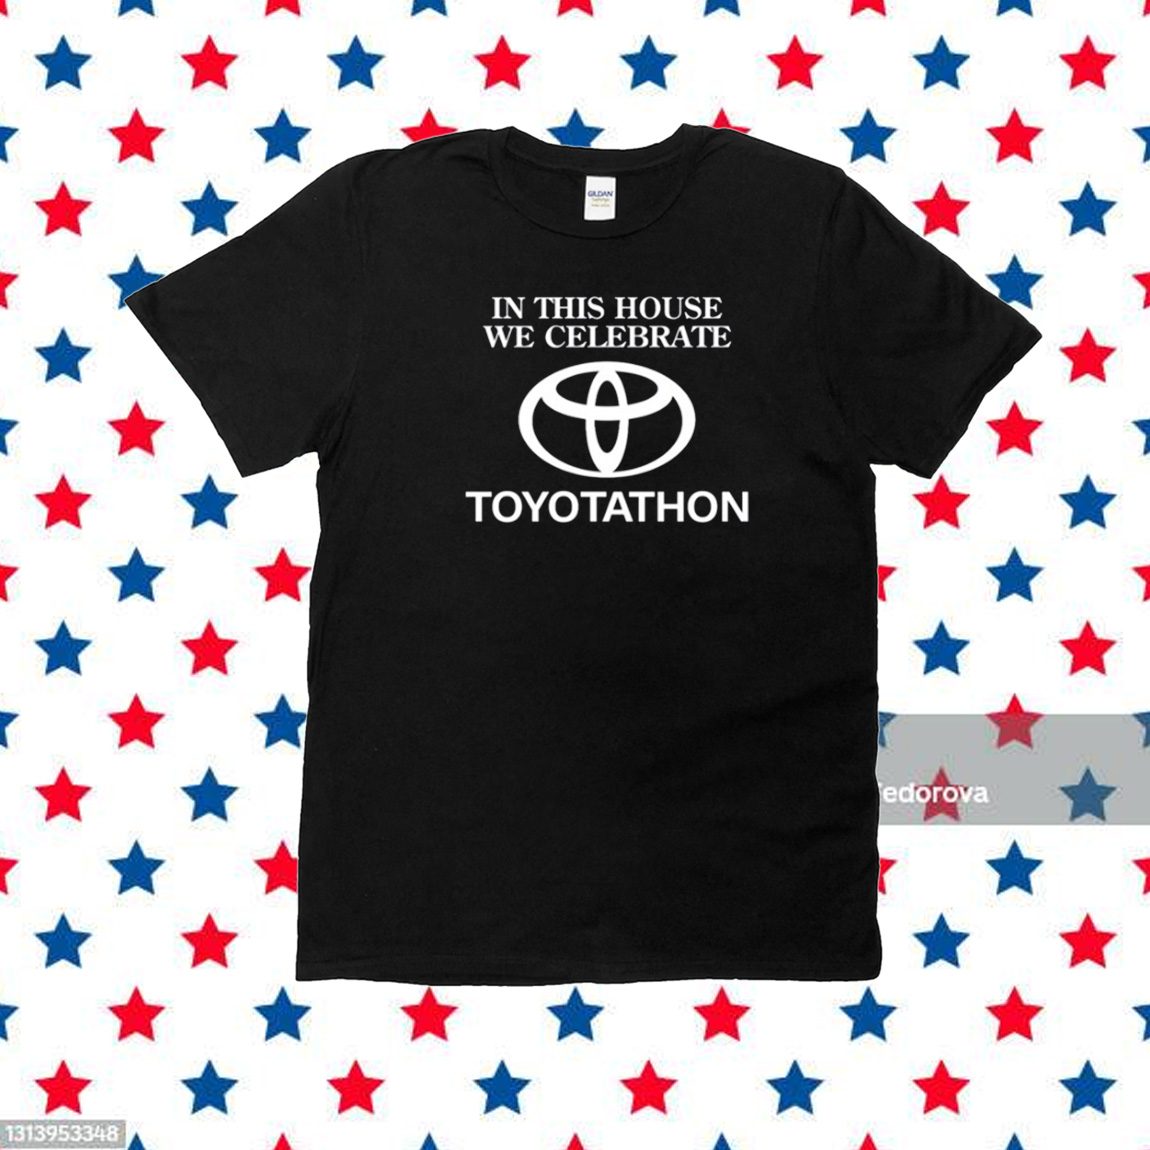 In This House We Celebrate Toyotathon TShirt